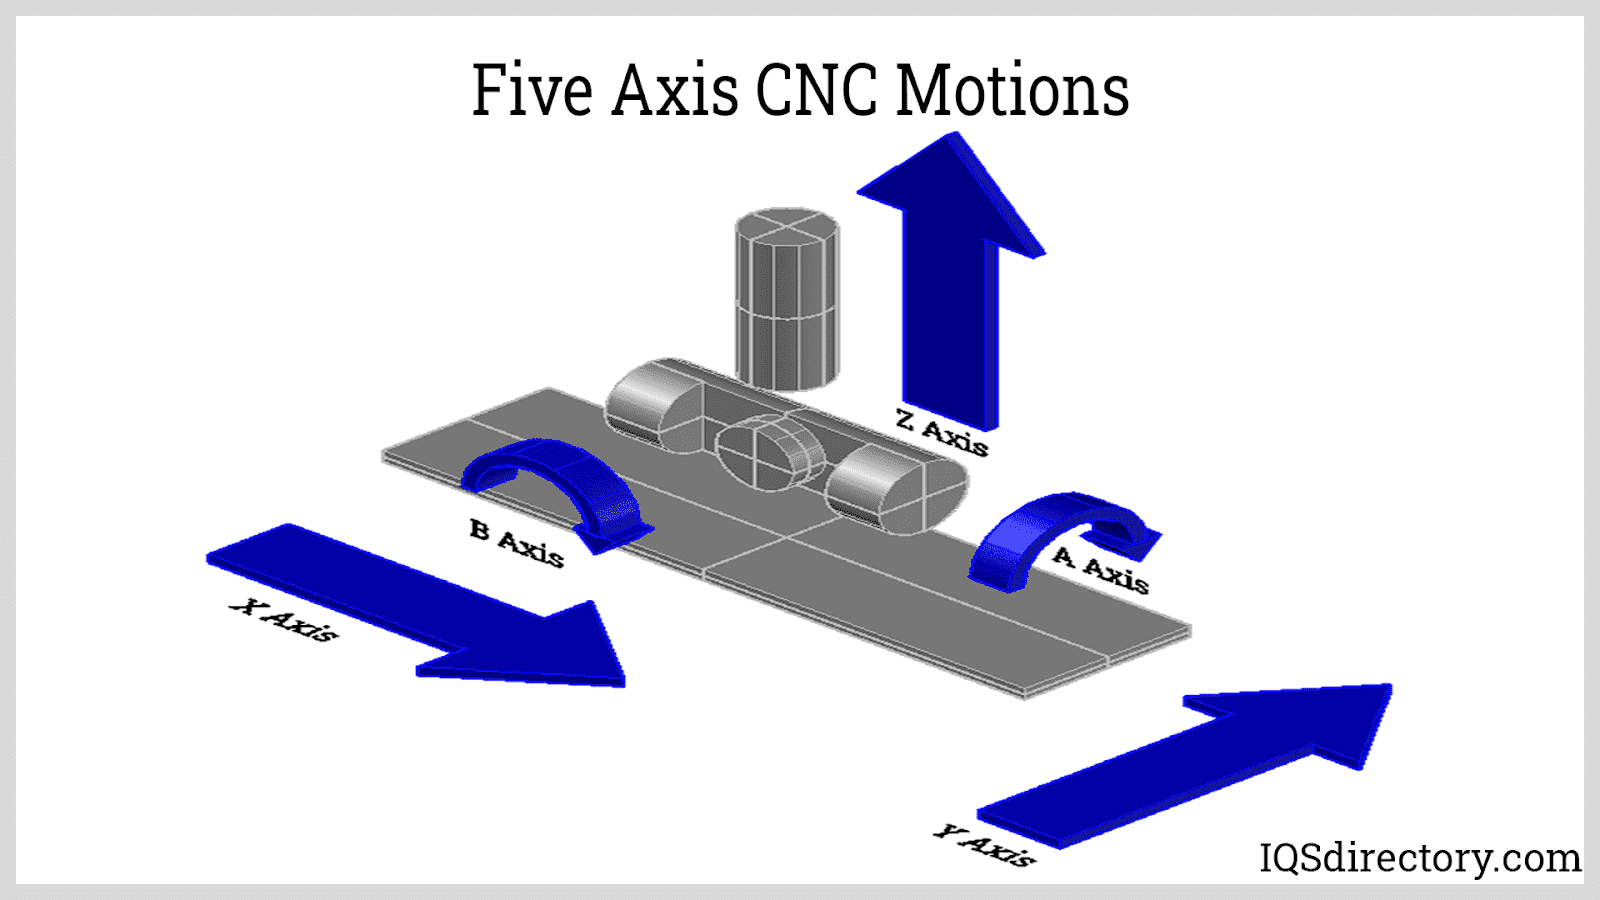 Five Axis CNC Motions